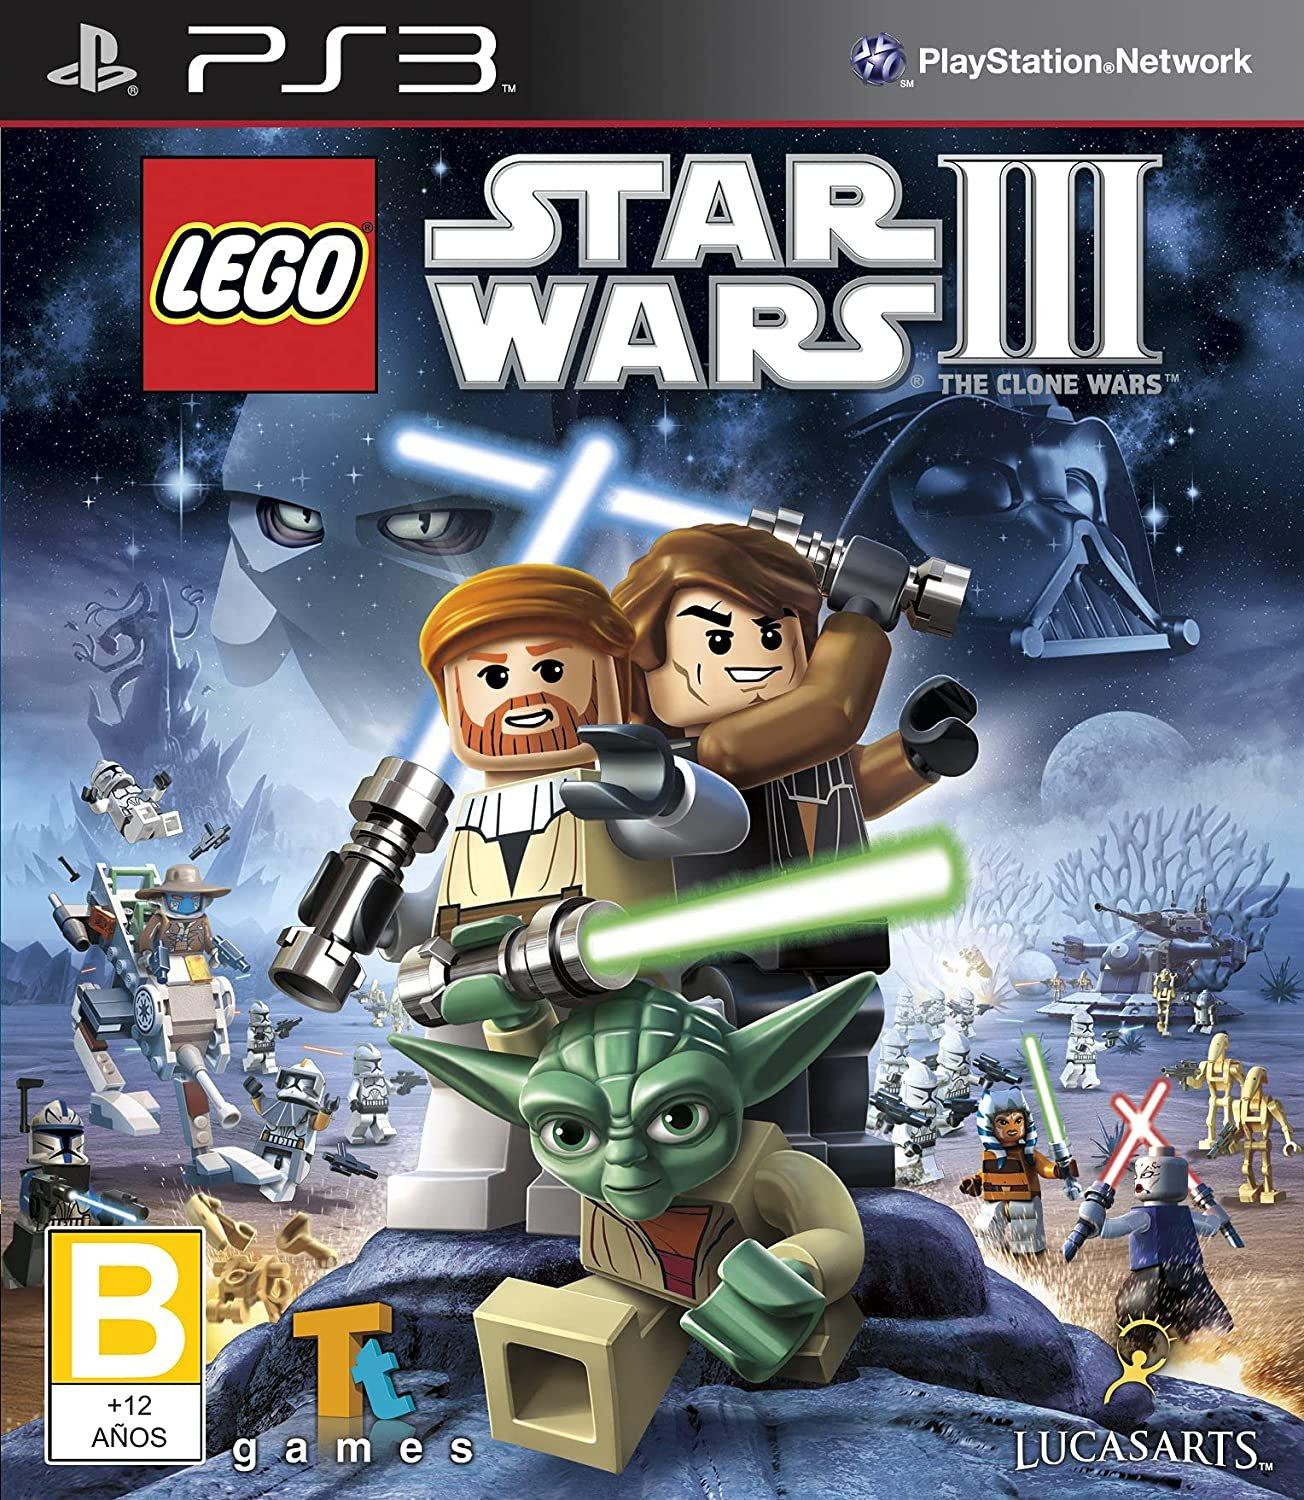 lego star wars the video game ps4